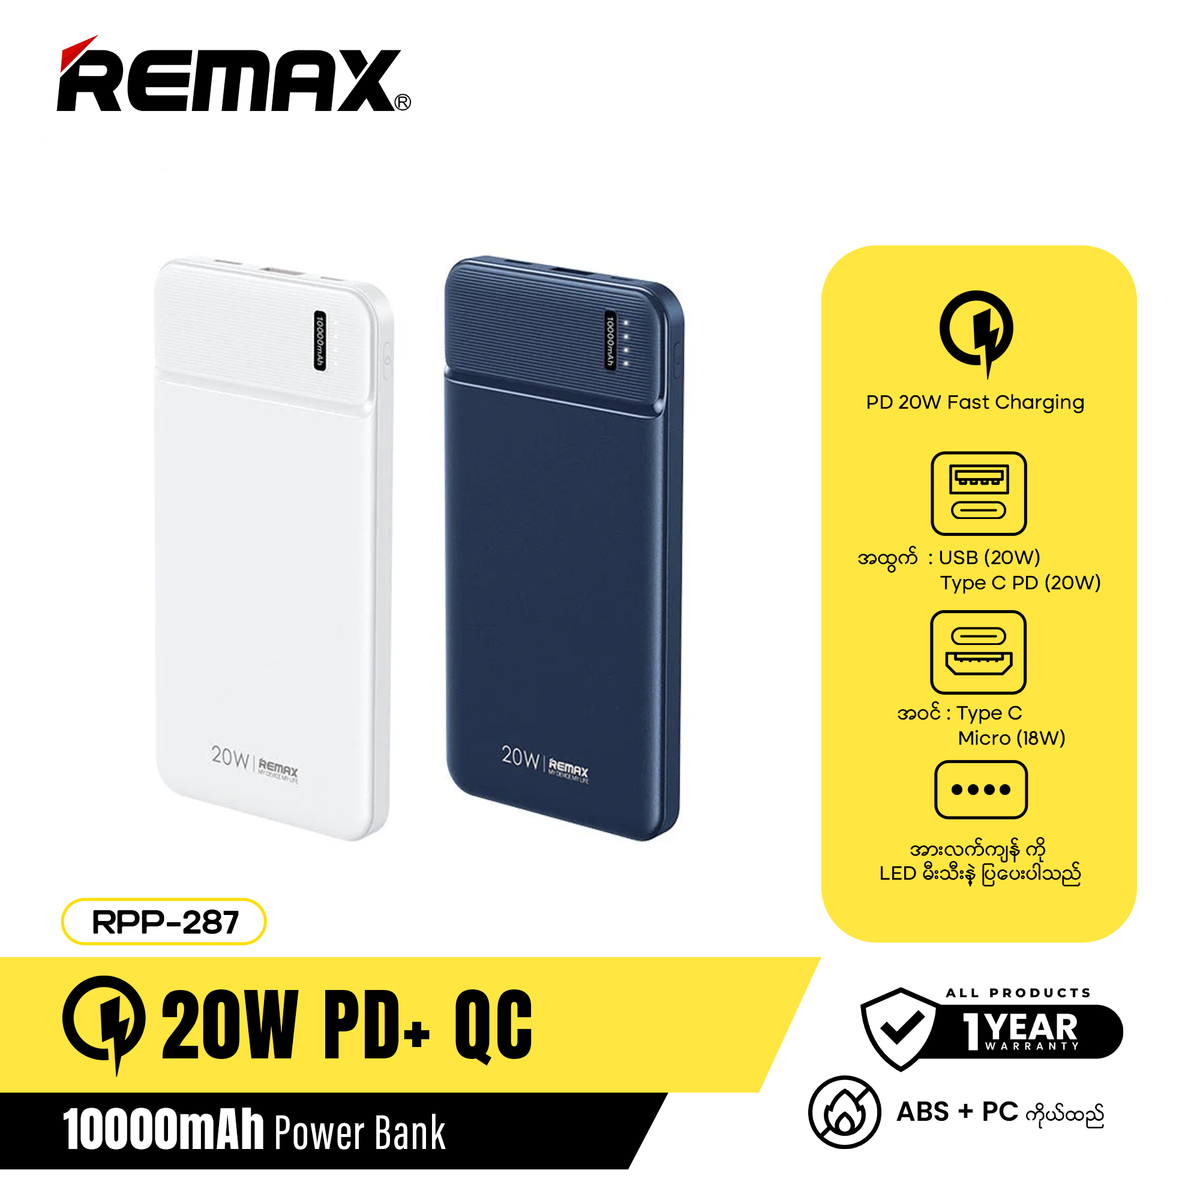 REMAX RPP-287 10000mAh PURE SERIES 20W PD+QC MULTI-COMPATIBLE FAST CHARGING POWER BANK(Blue)